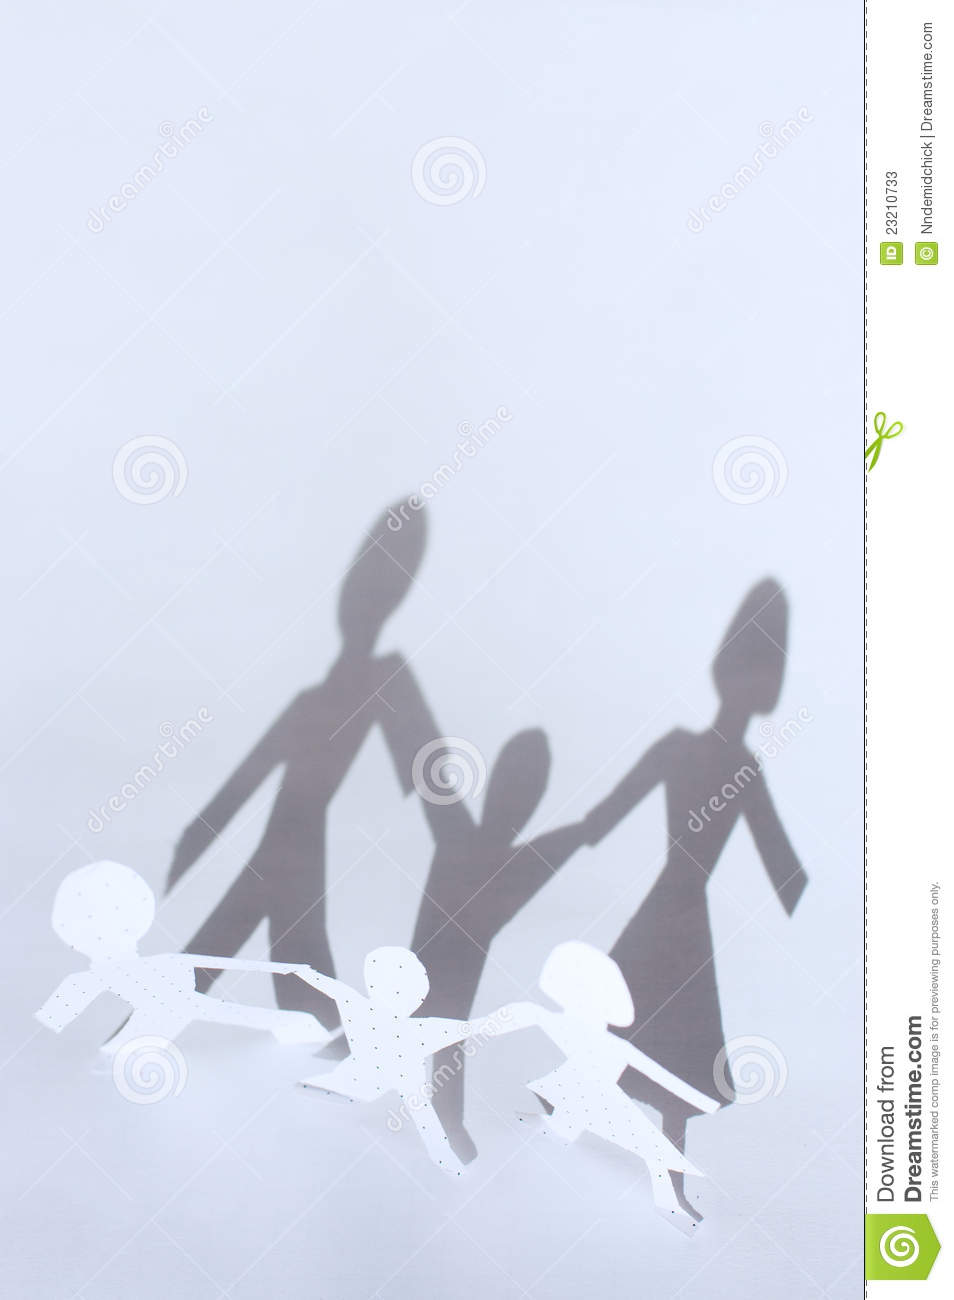 Chain  Man Woman And Baby And Shadows From Them  Family Concept